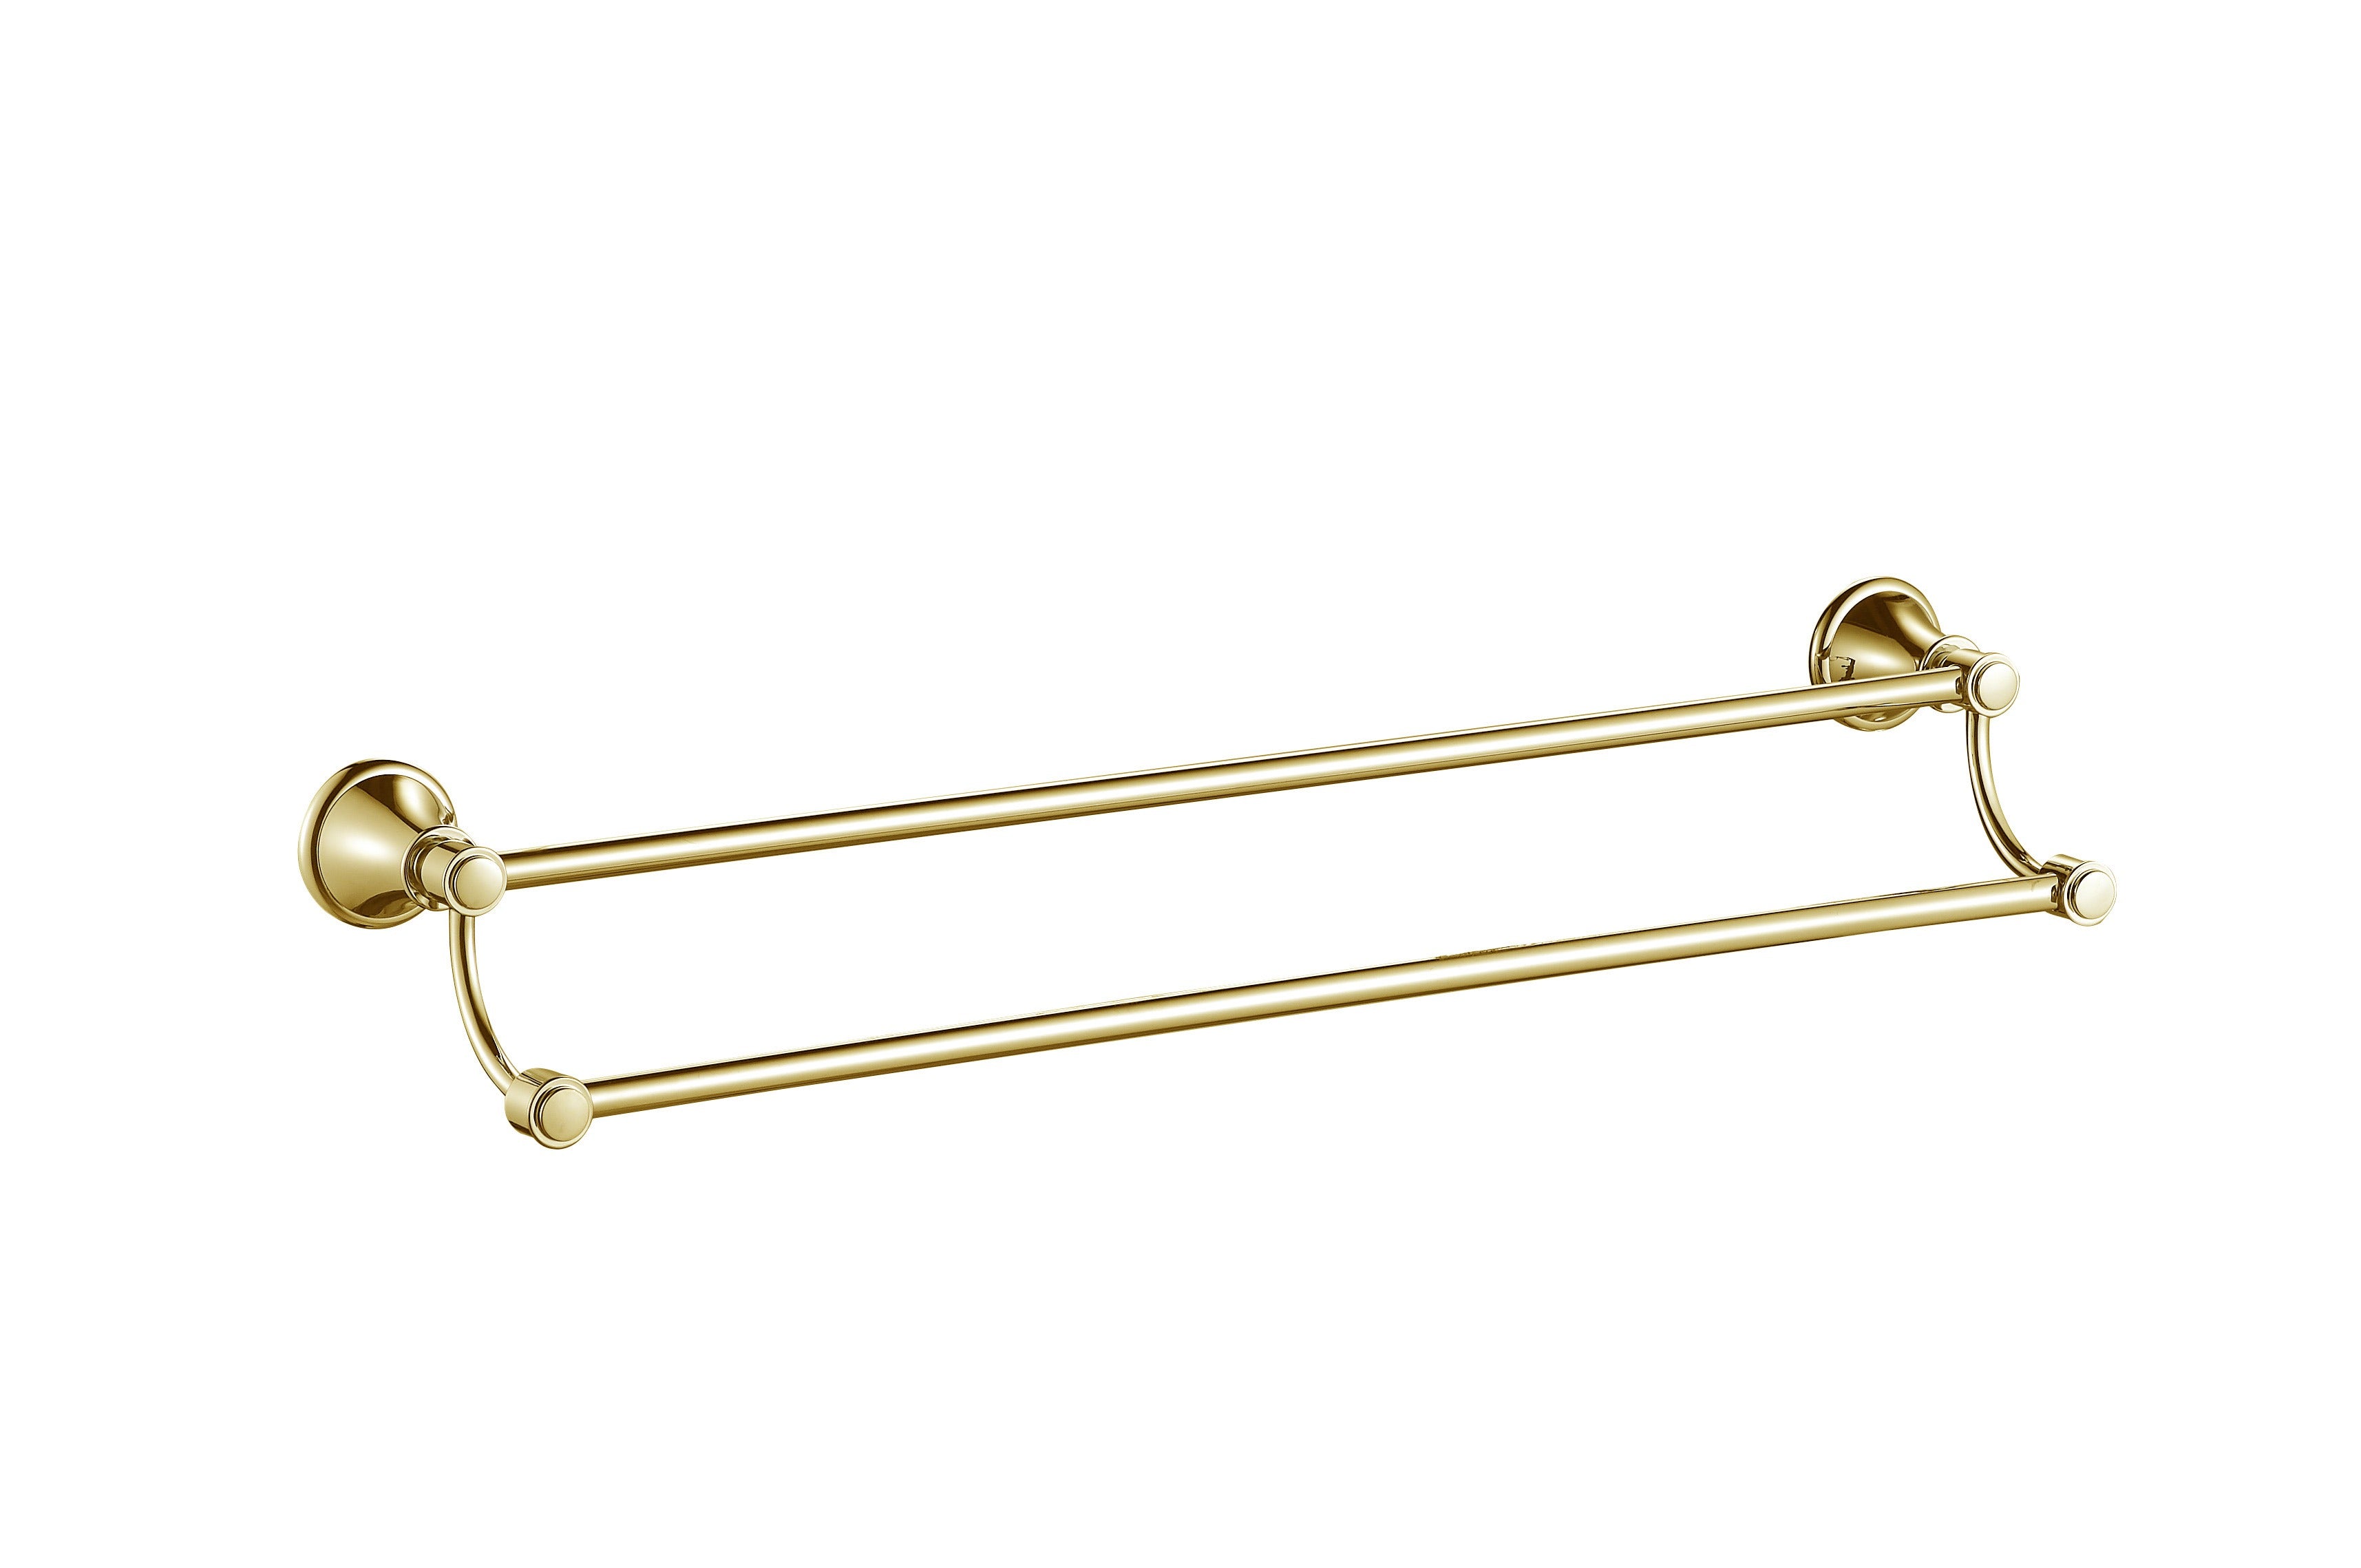 IKON CLASICO NON-HEATED DOUBLE TOWEL RAIL BRUSHED GOLD 600MM